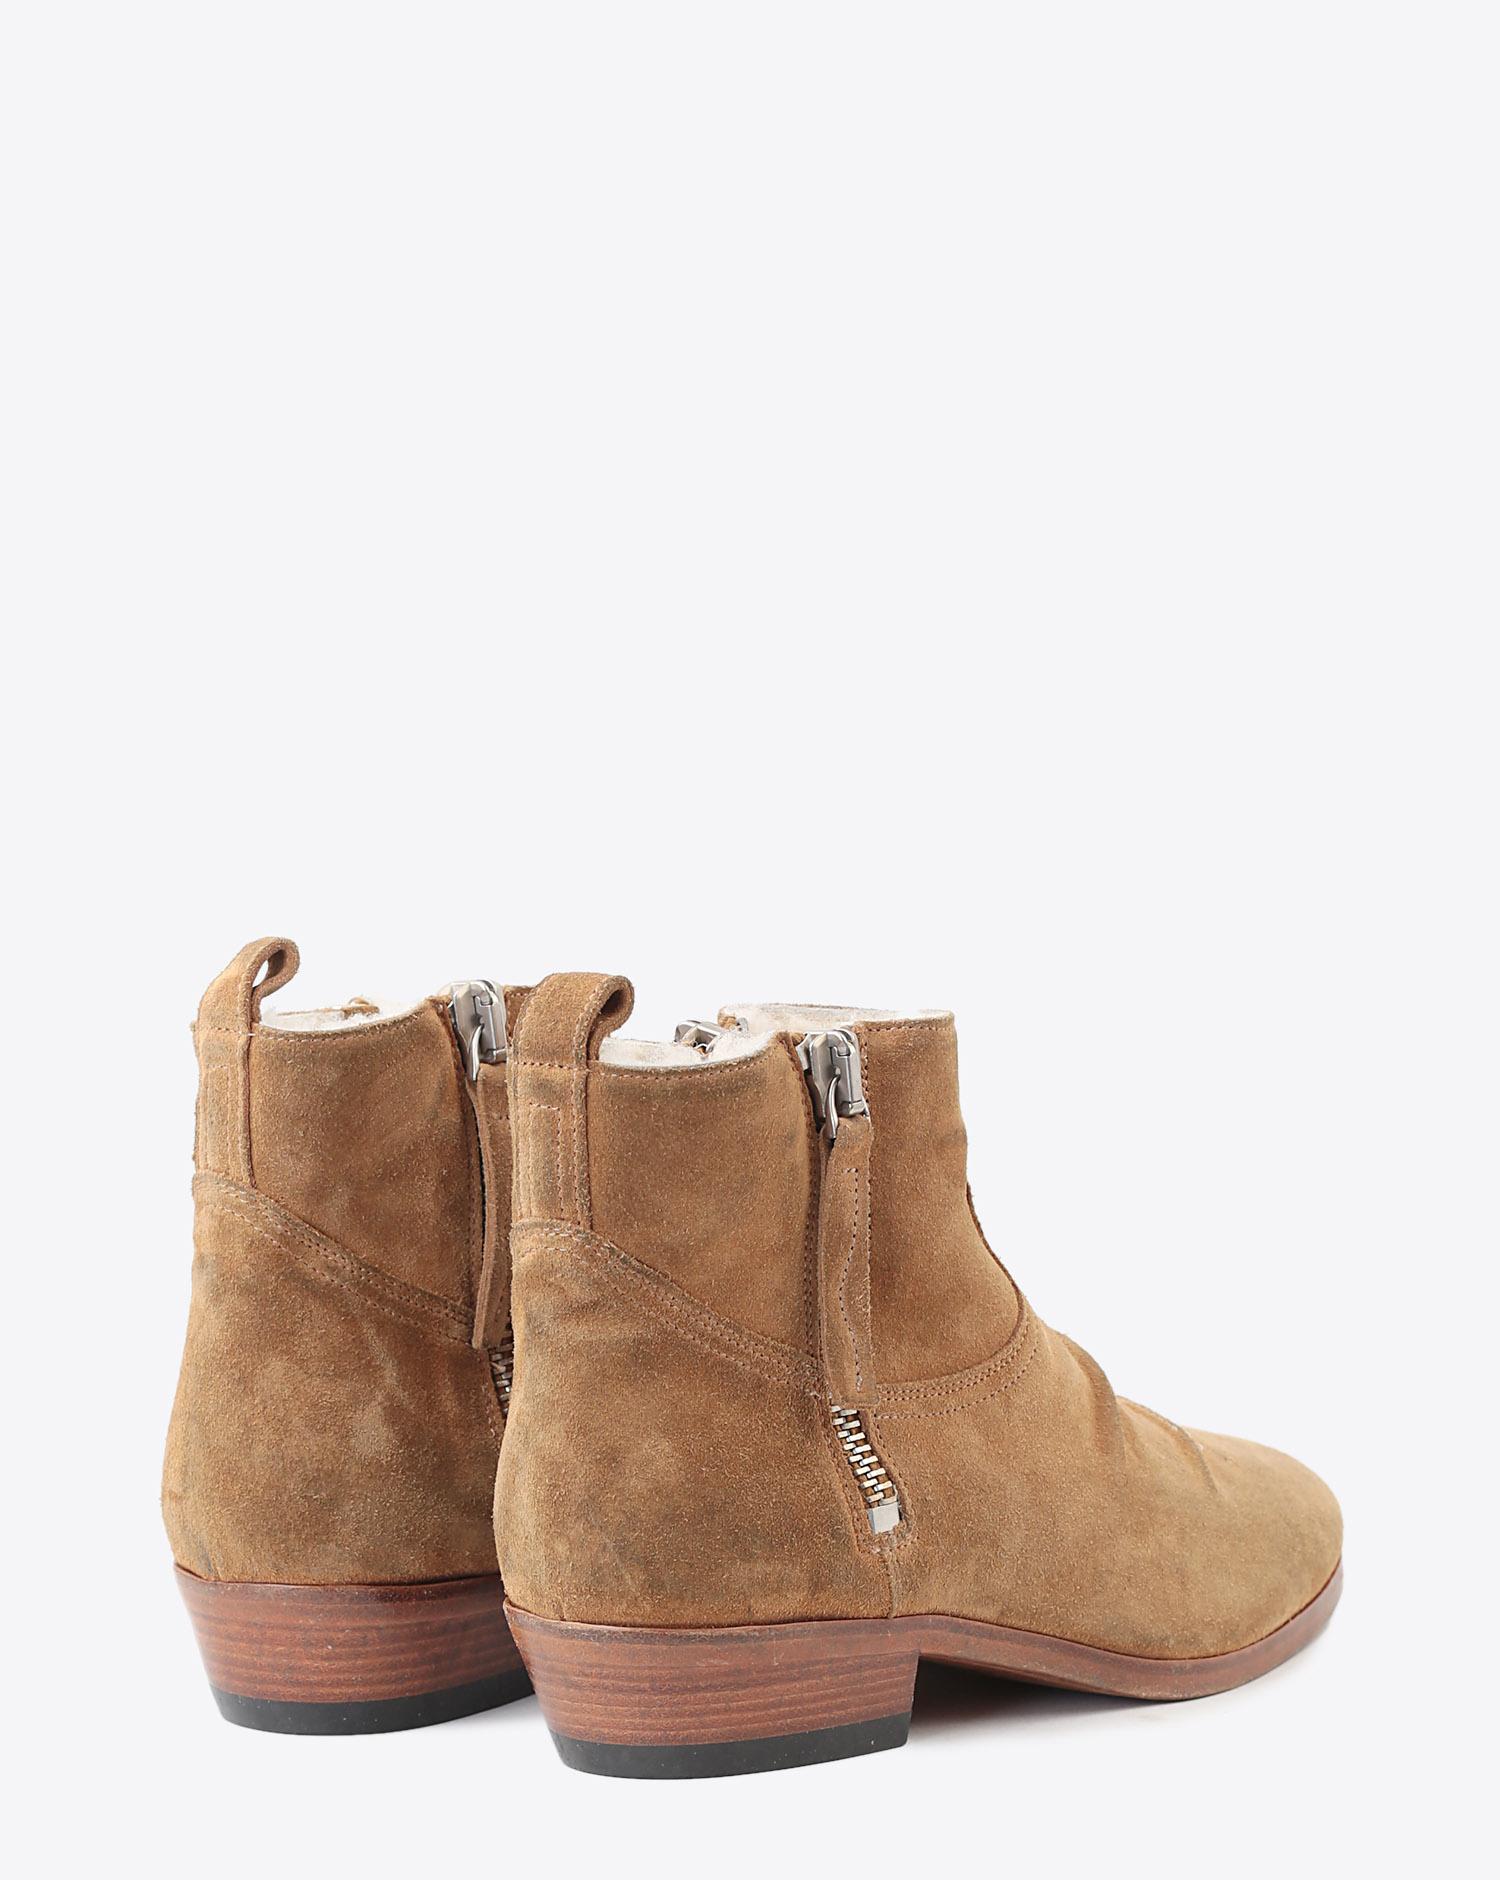 Golden Goose Woman Chaussures Pré-Collection Boots Viand - Tawny Suede - Shearling  